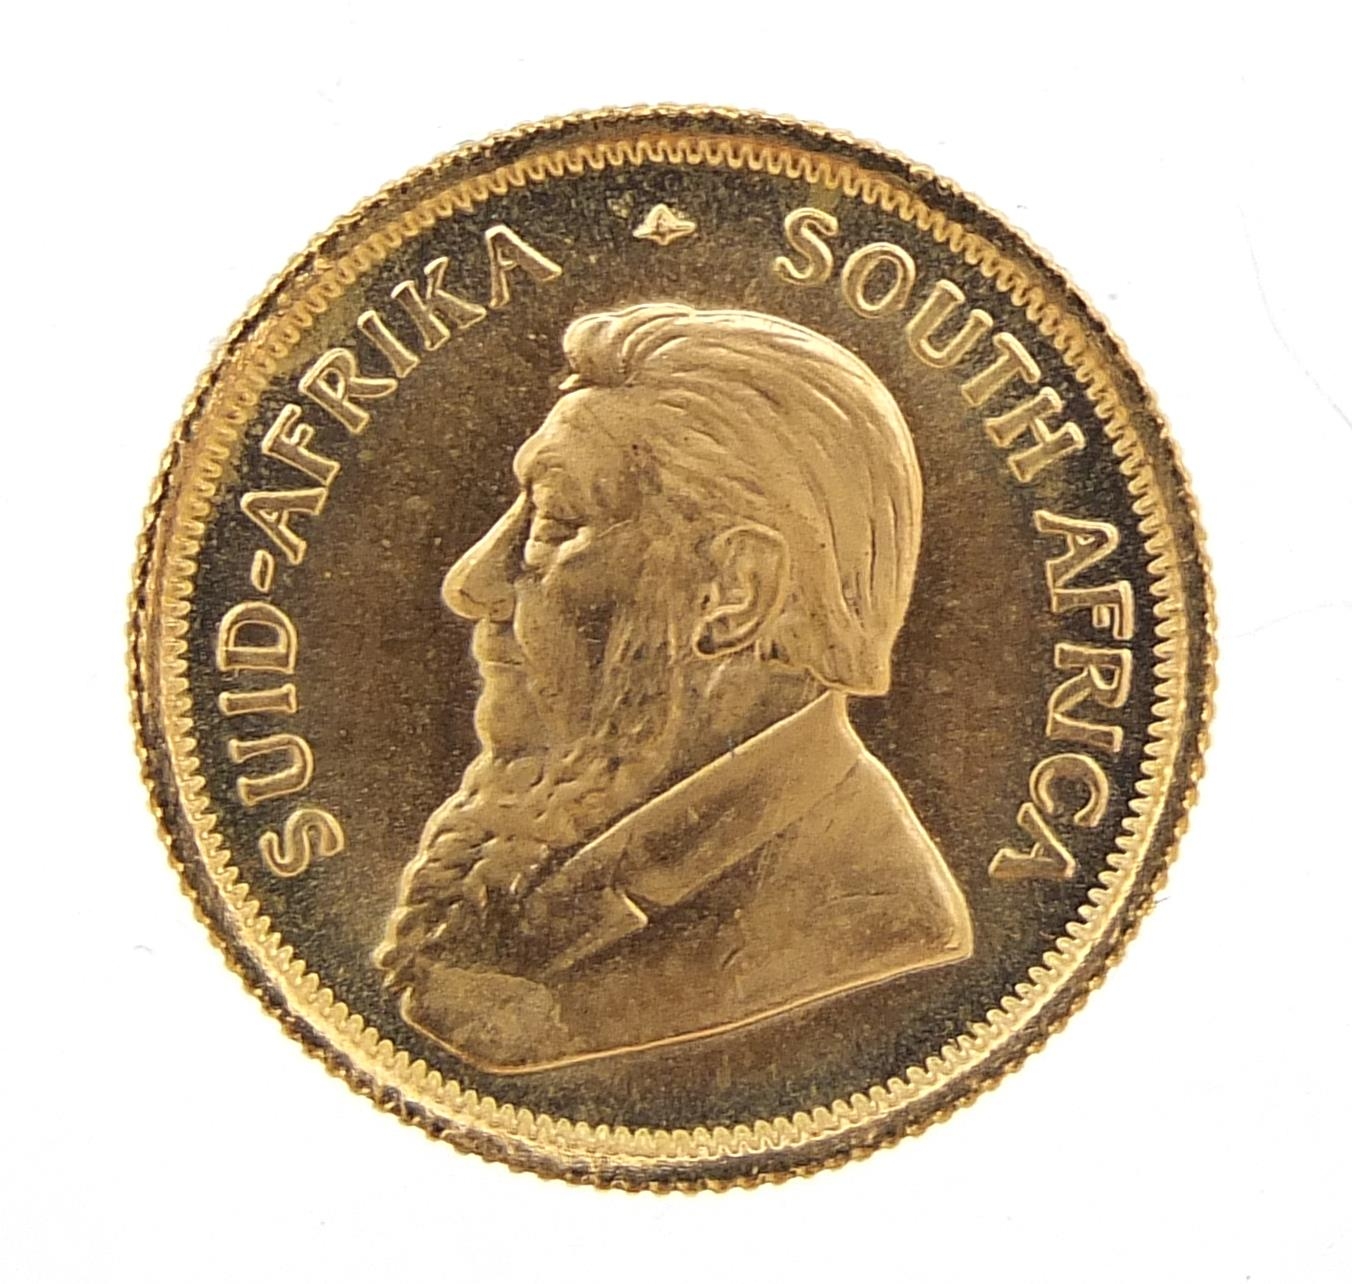 South African 1980 gold one tenth krugerrand - this lot is sold without buyer?s premium, the - Image 2 of 3